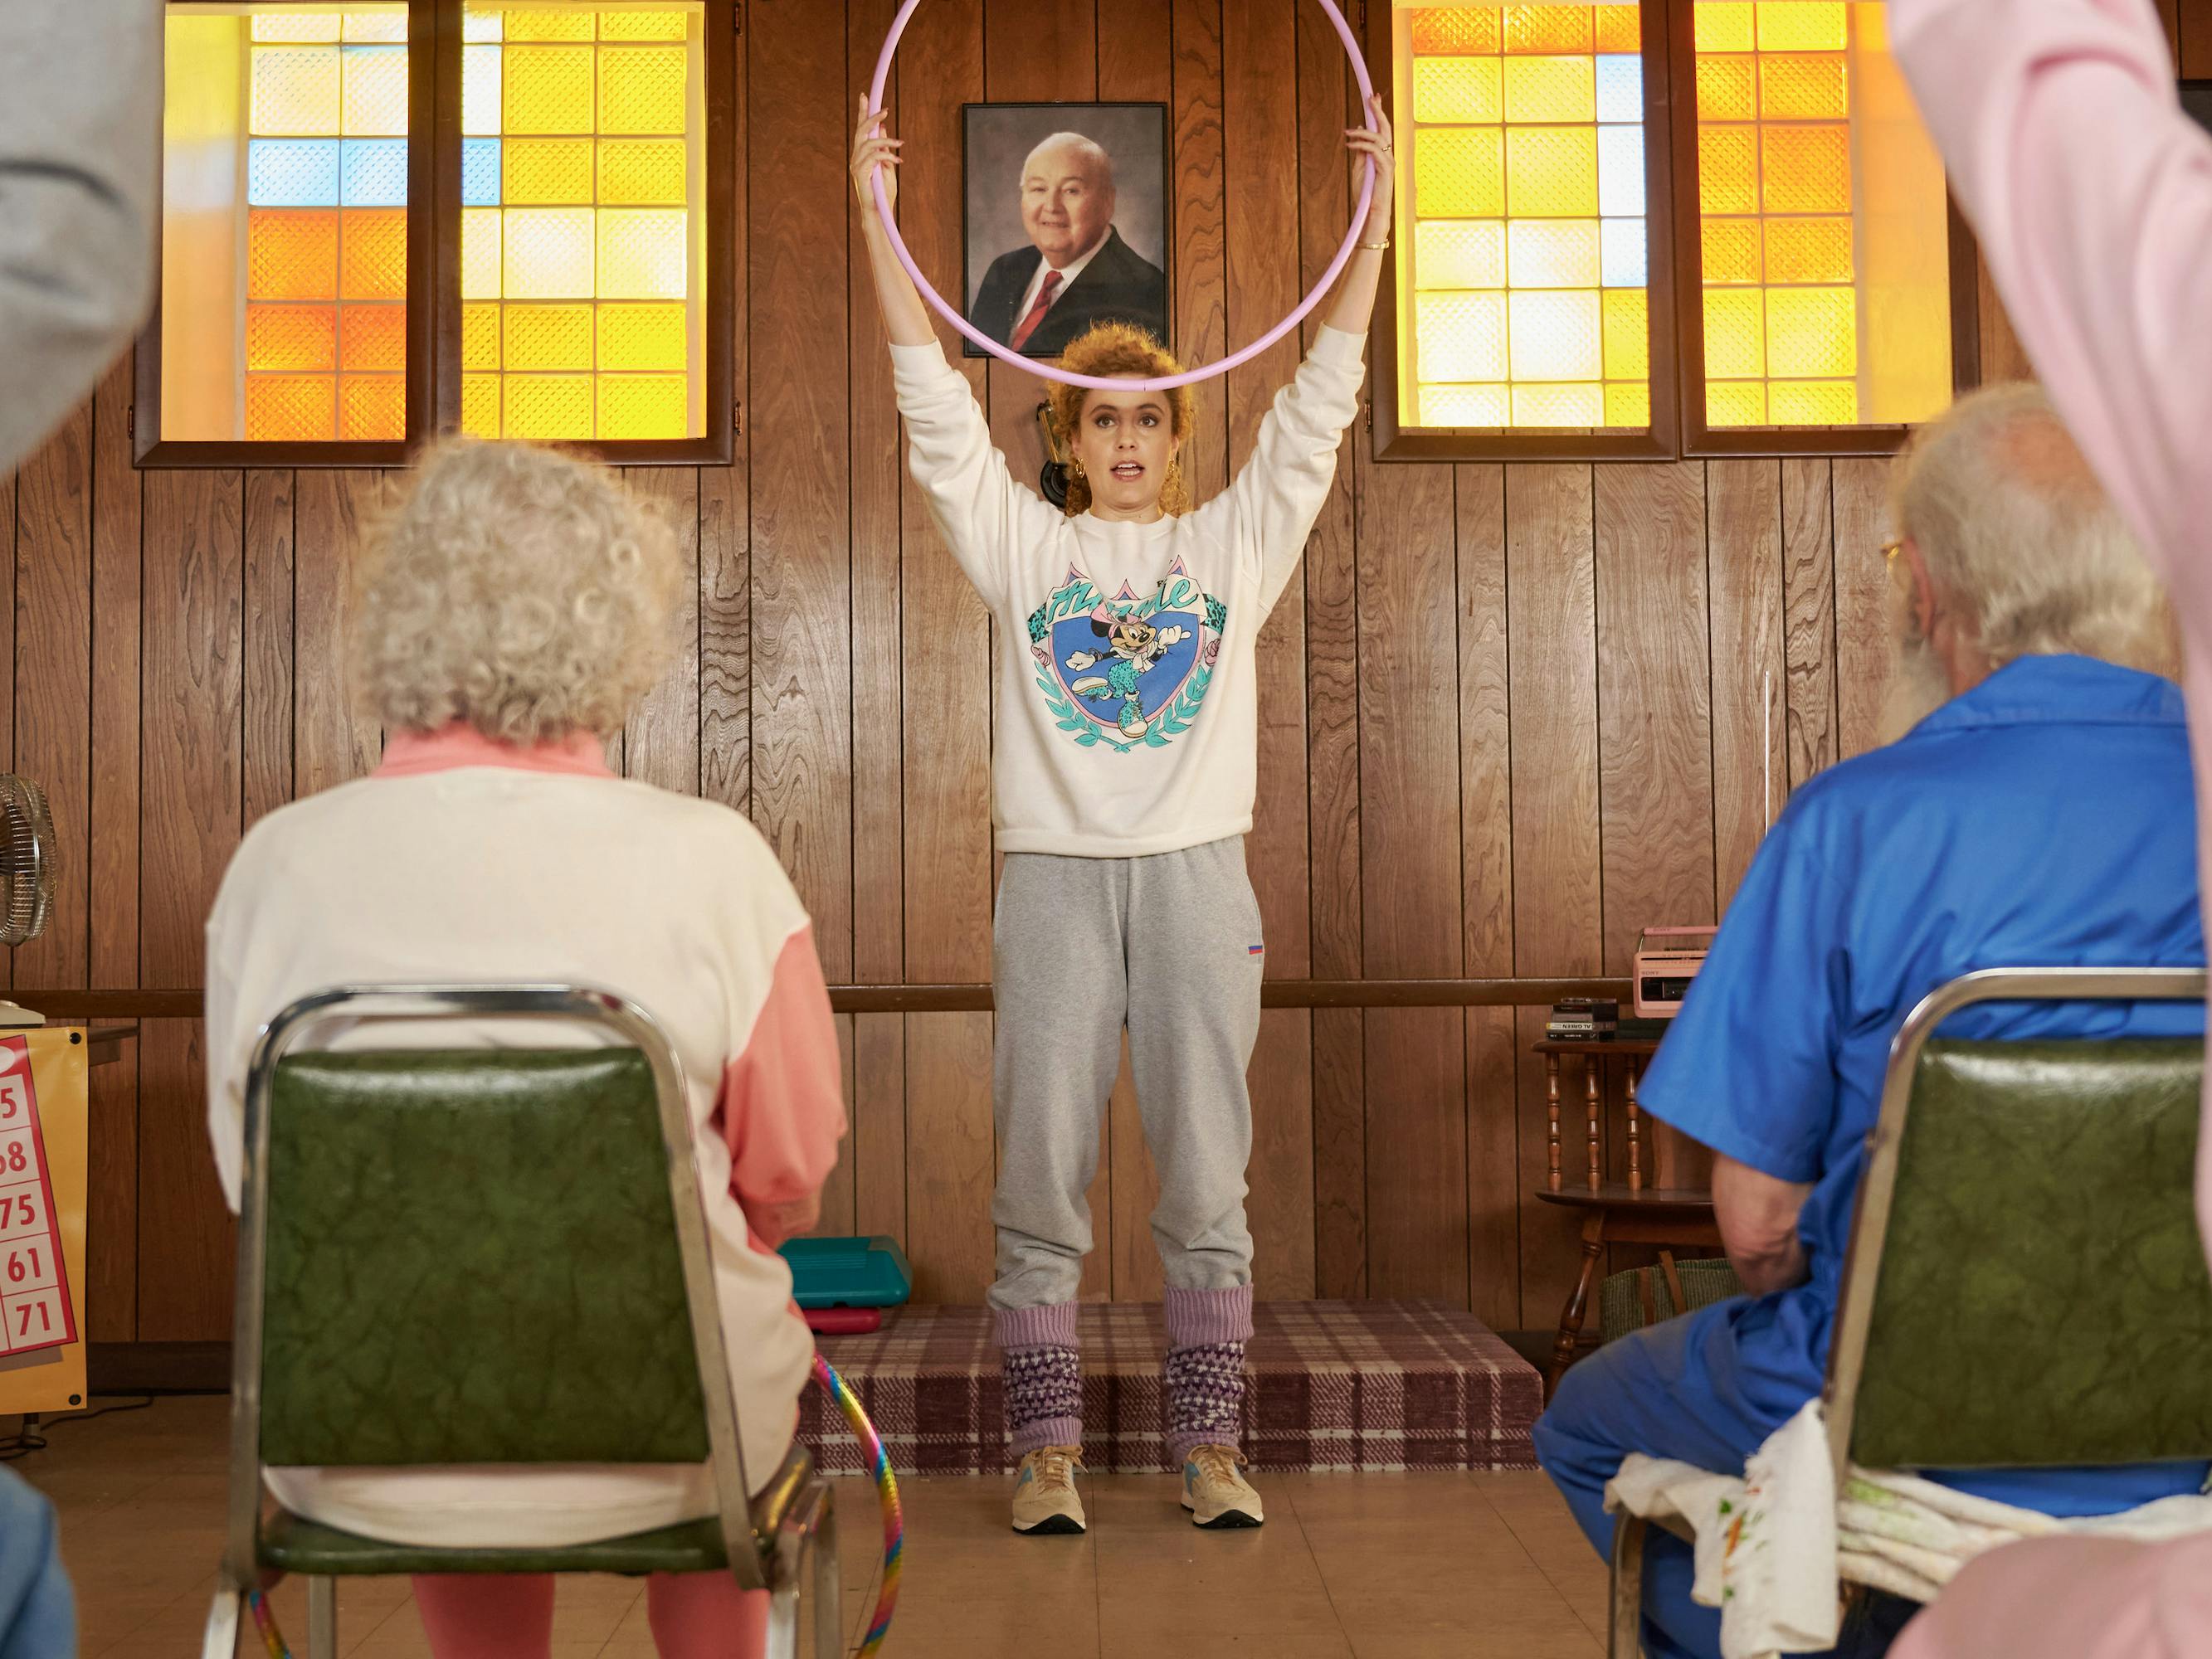 Greta Gerwig wears a white top and grey sweats and teaches an aerobics class to a bunch of grey-haired people.